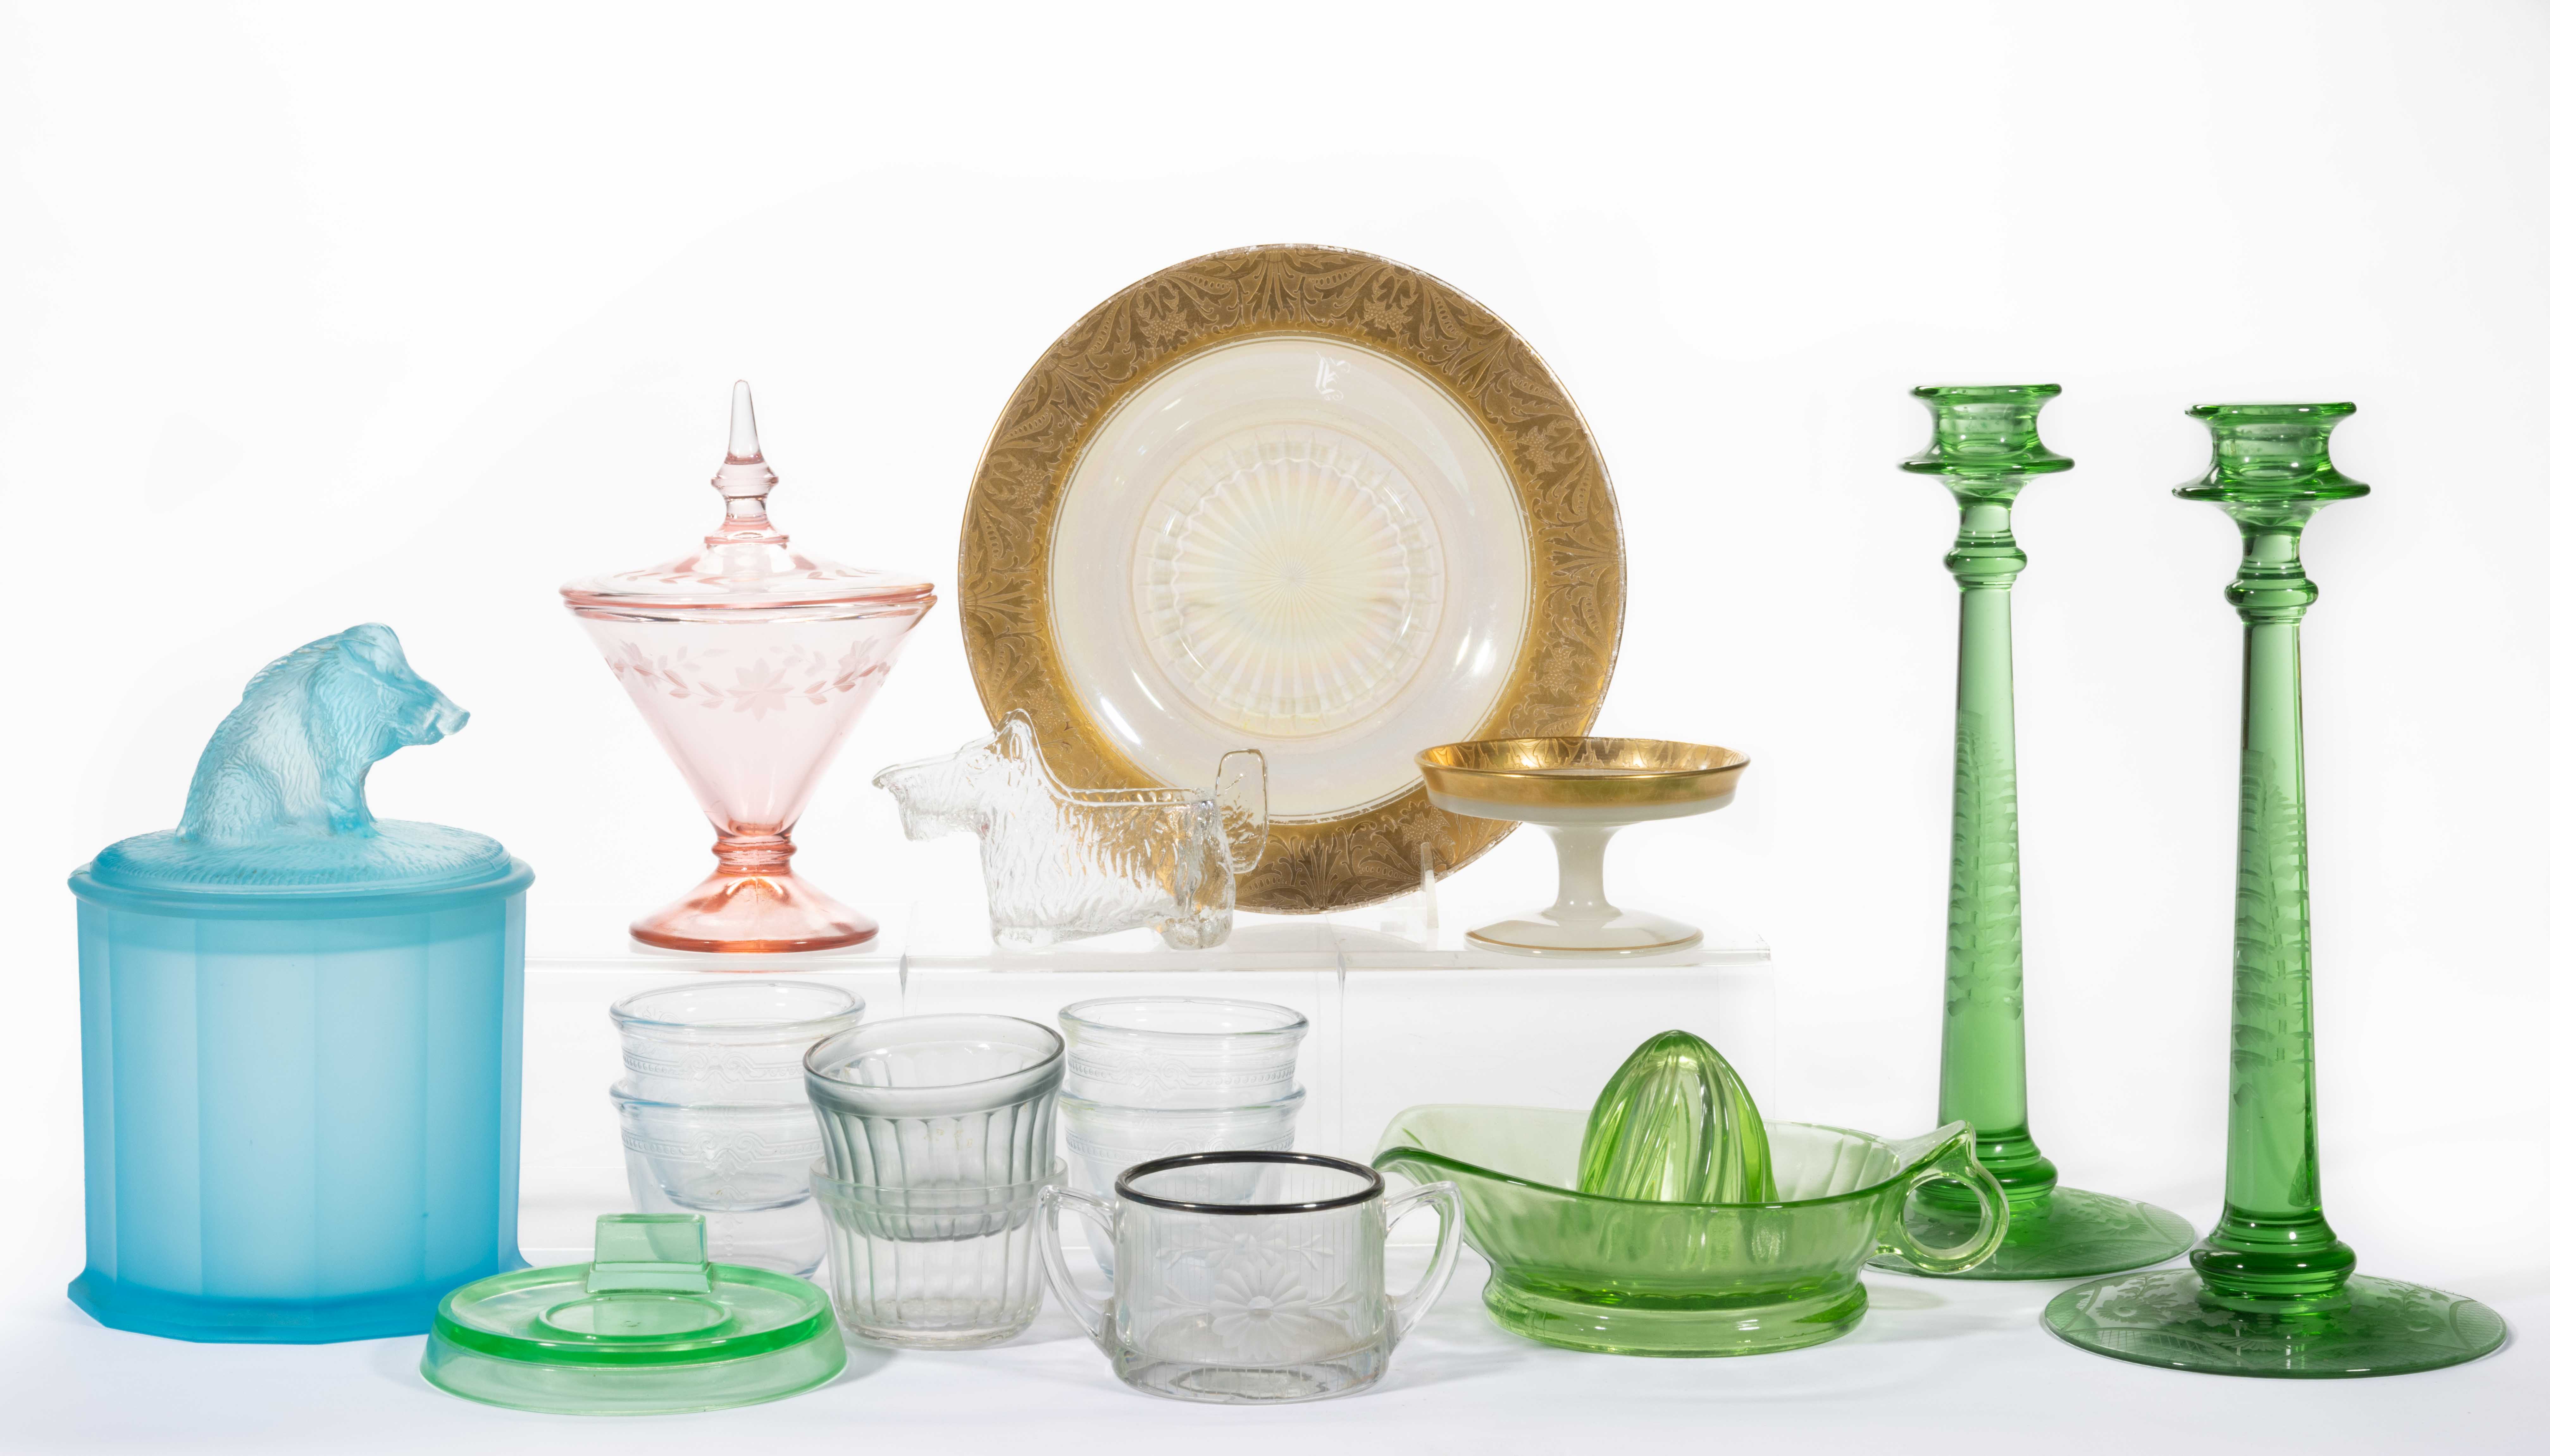 ASSORTED VINTAGE AND DEPRESSION GLASS ARTICLES, LOT OF 16,